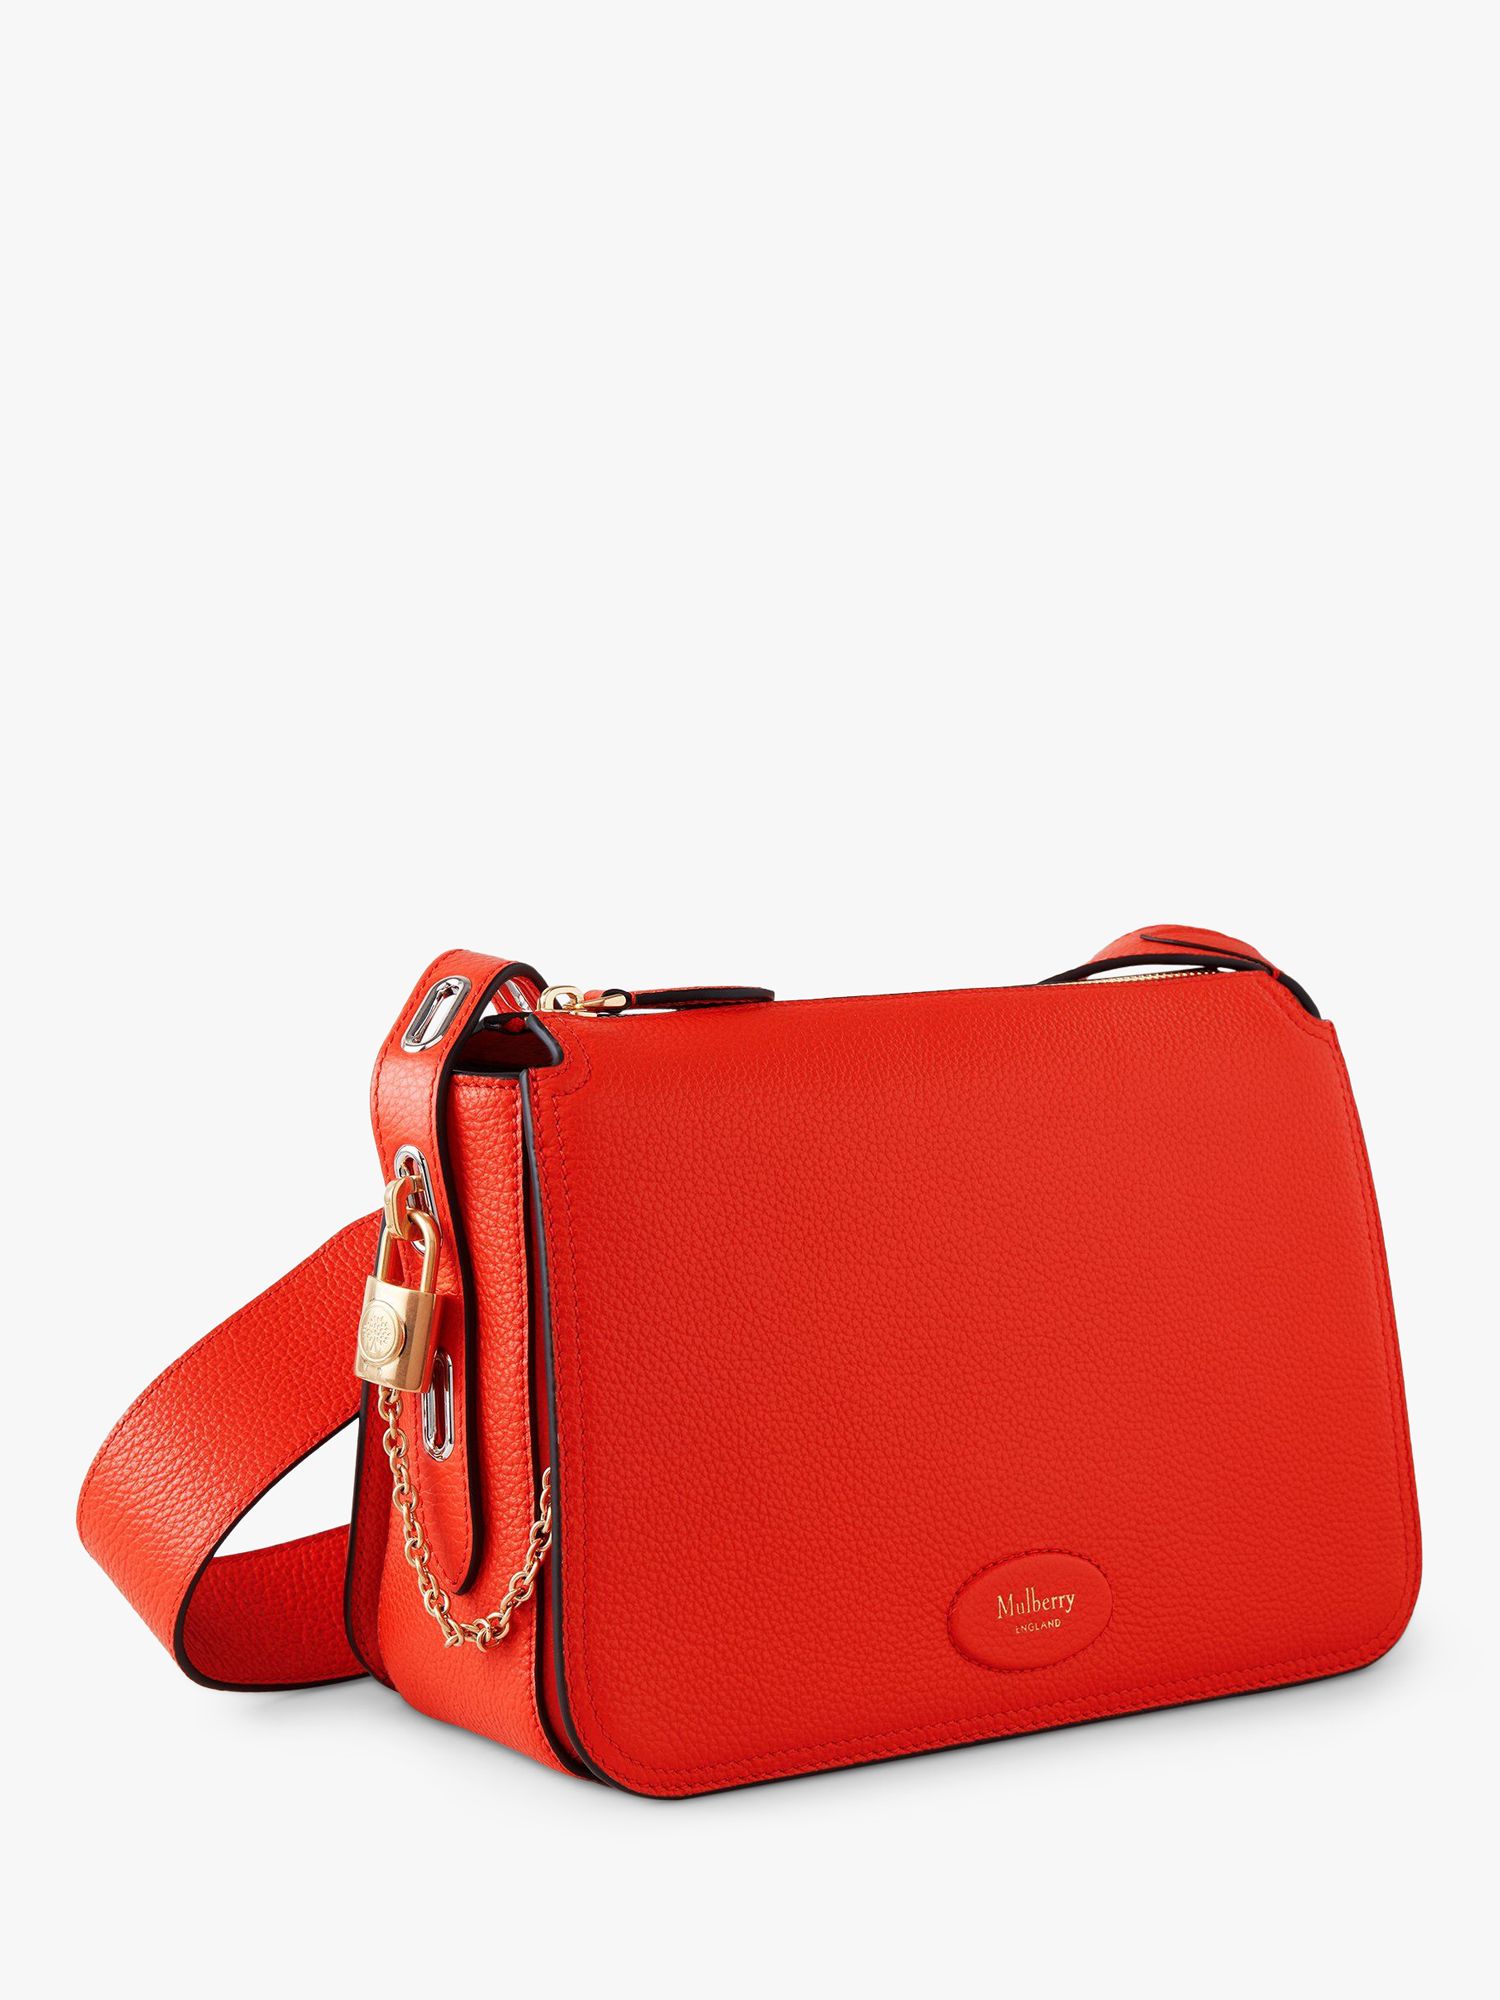 Mulberry Billie Small Classic Grain Leather Cross Body Bag, Coral ...